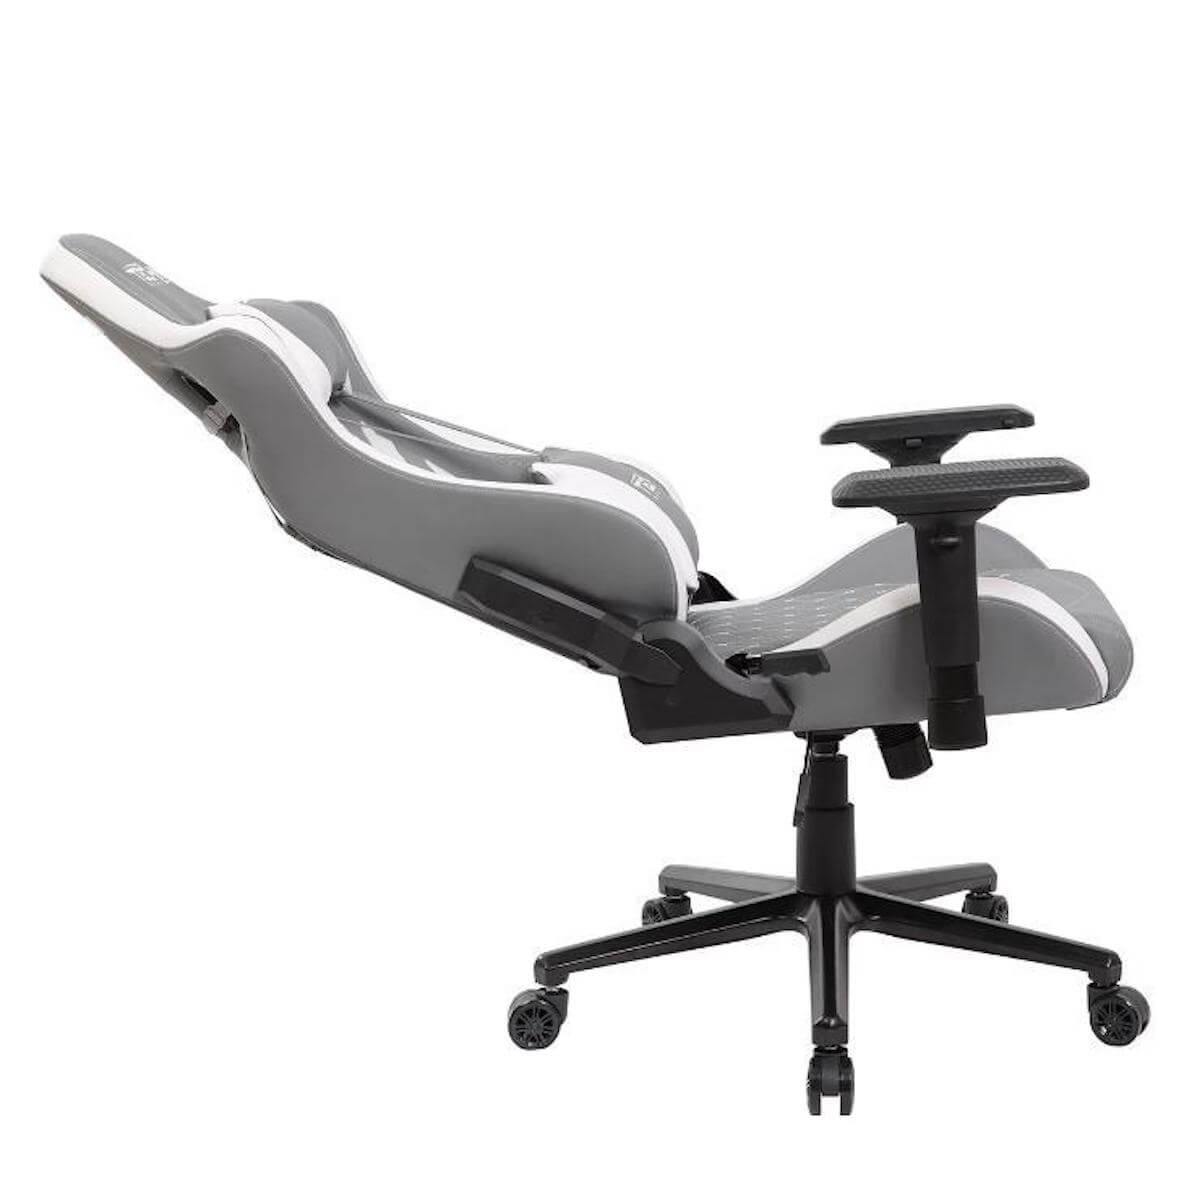 Techni Sport TS-83 White Ergonomic High Black Racer Style PC Gaming Chair RTA-TS83-GRY-WHT Reclined #color_white